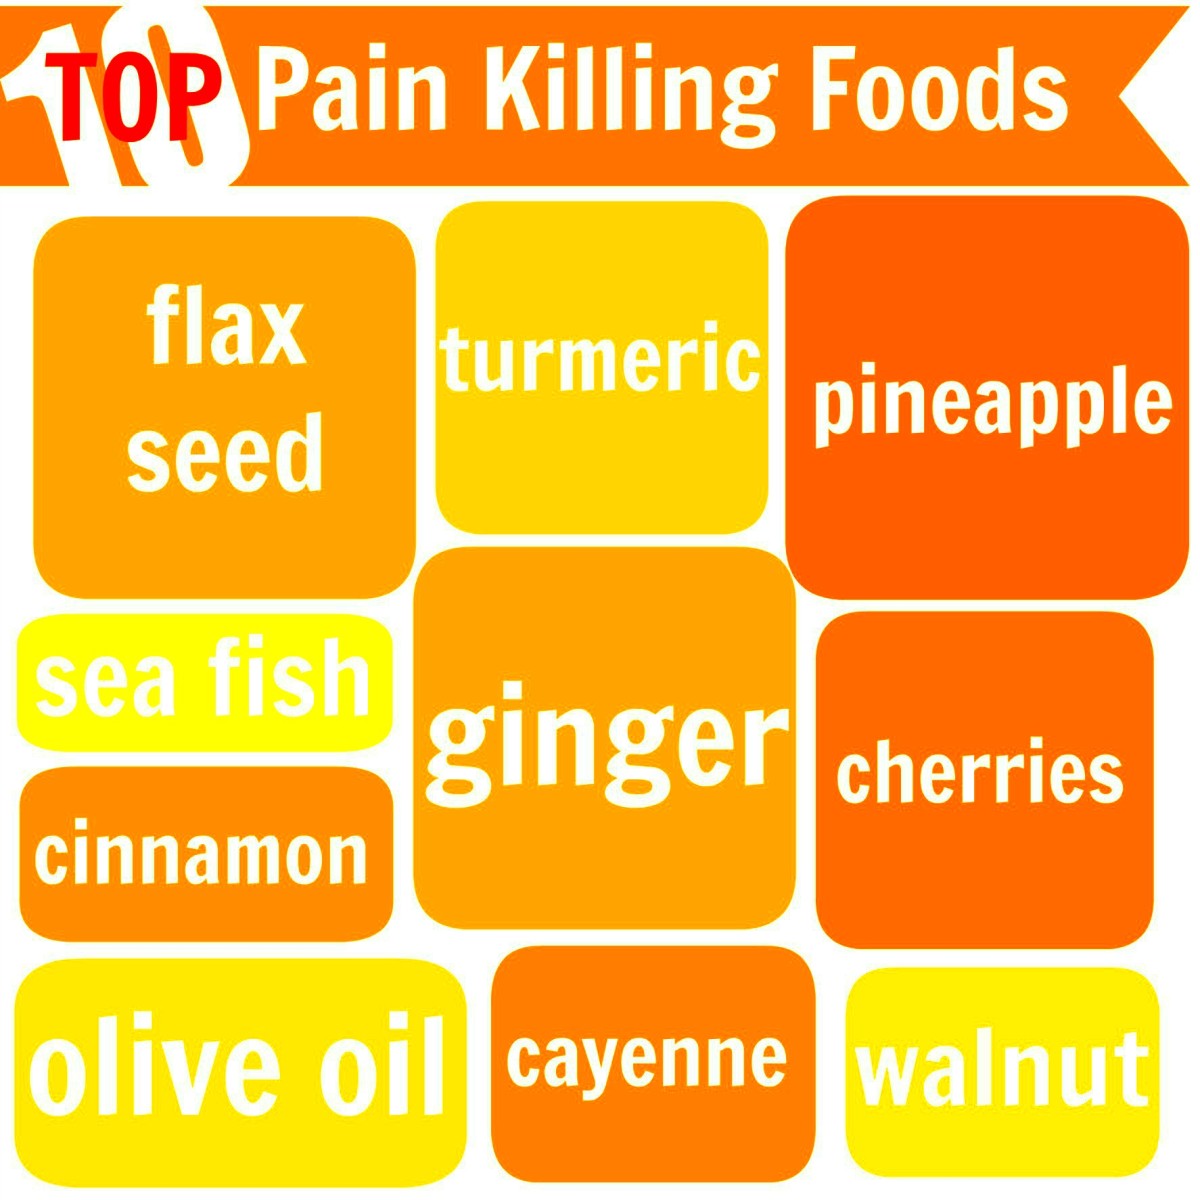 Top 10 Pain Killing Foods to Reduce Pain